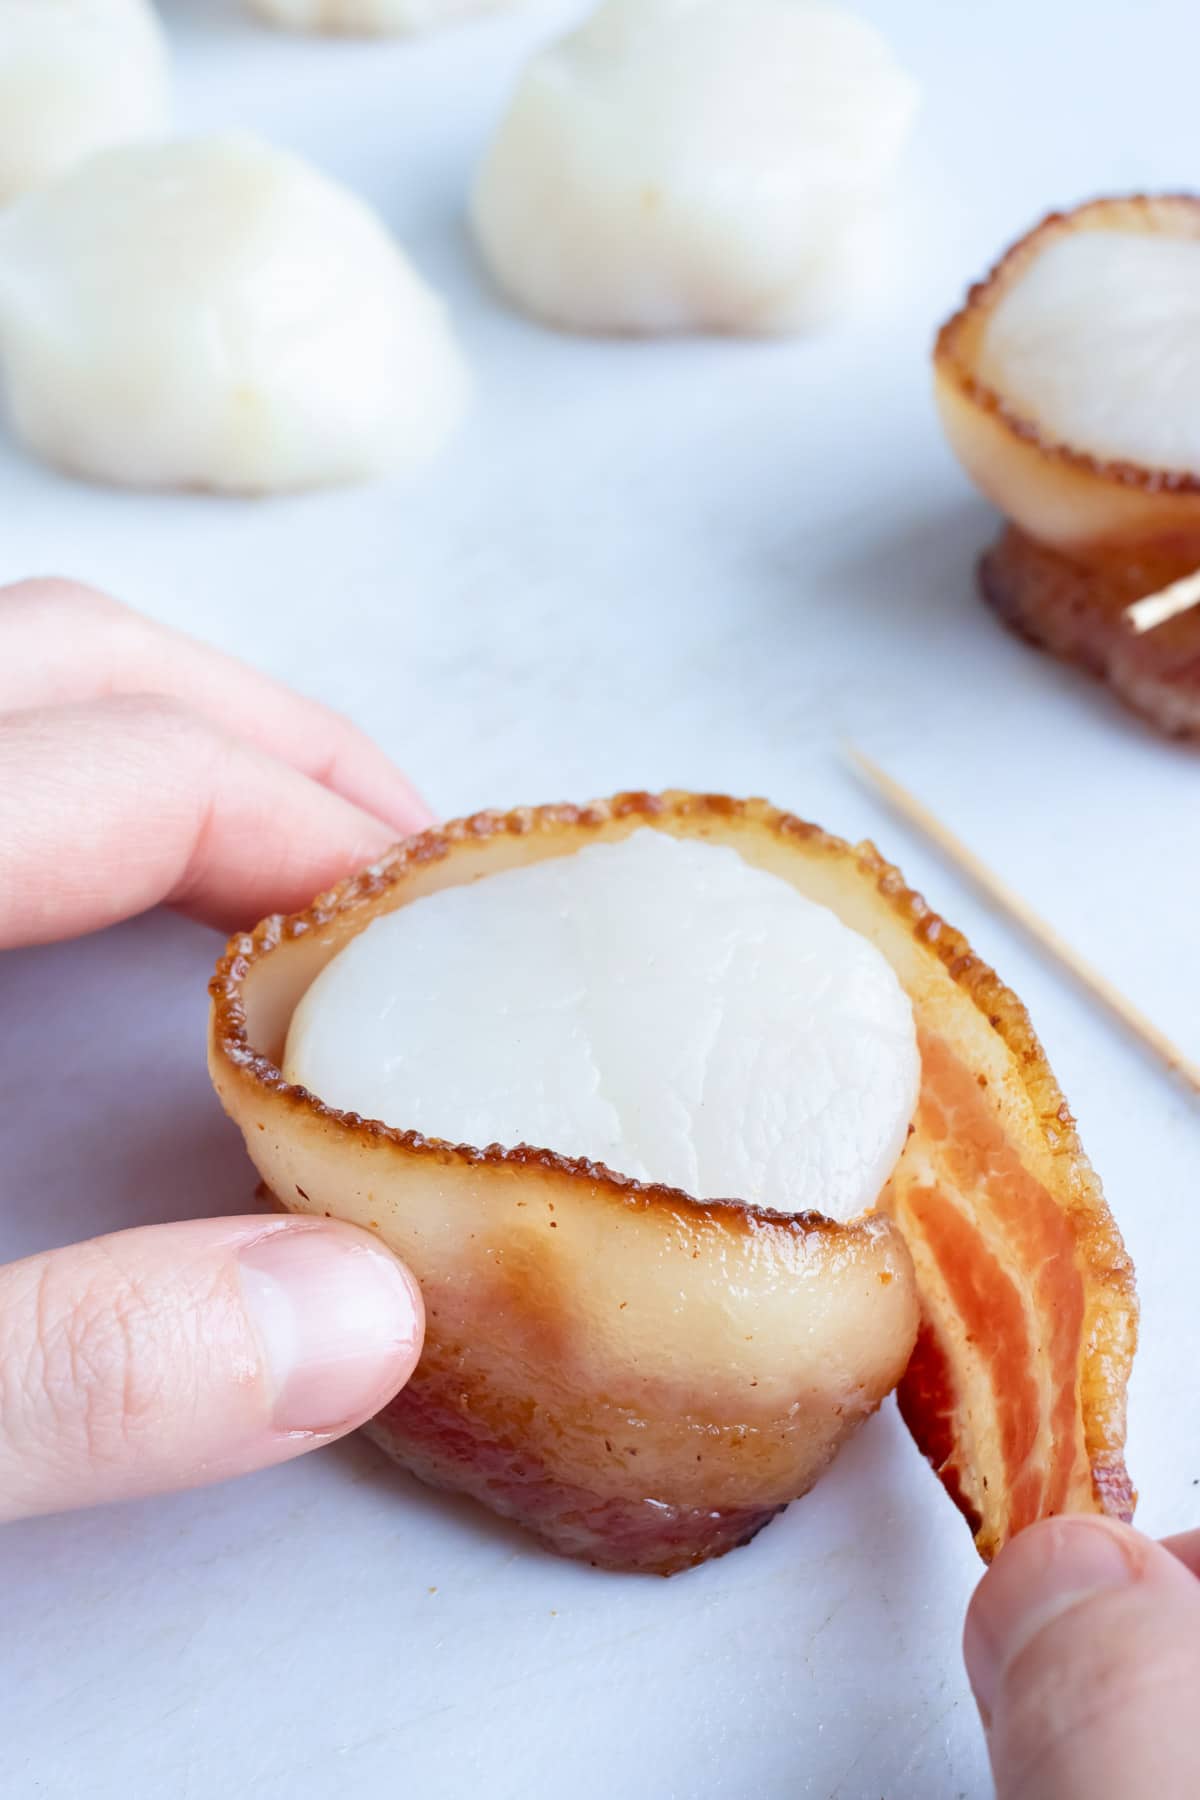 A slice of bacon being wrapped around a scallop.